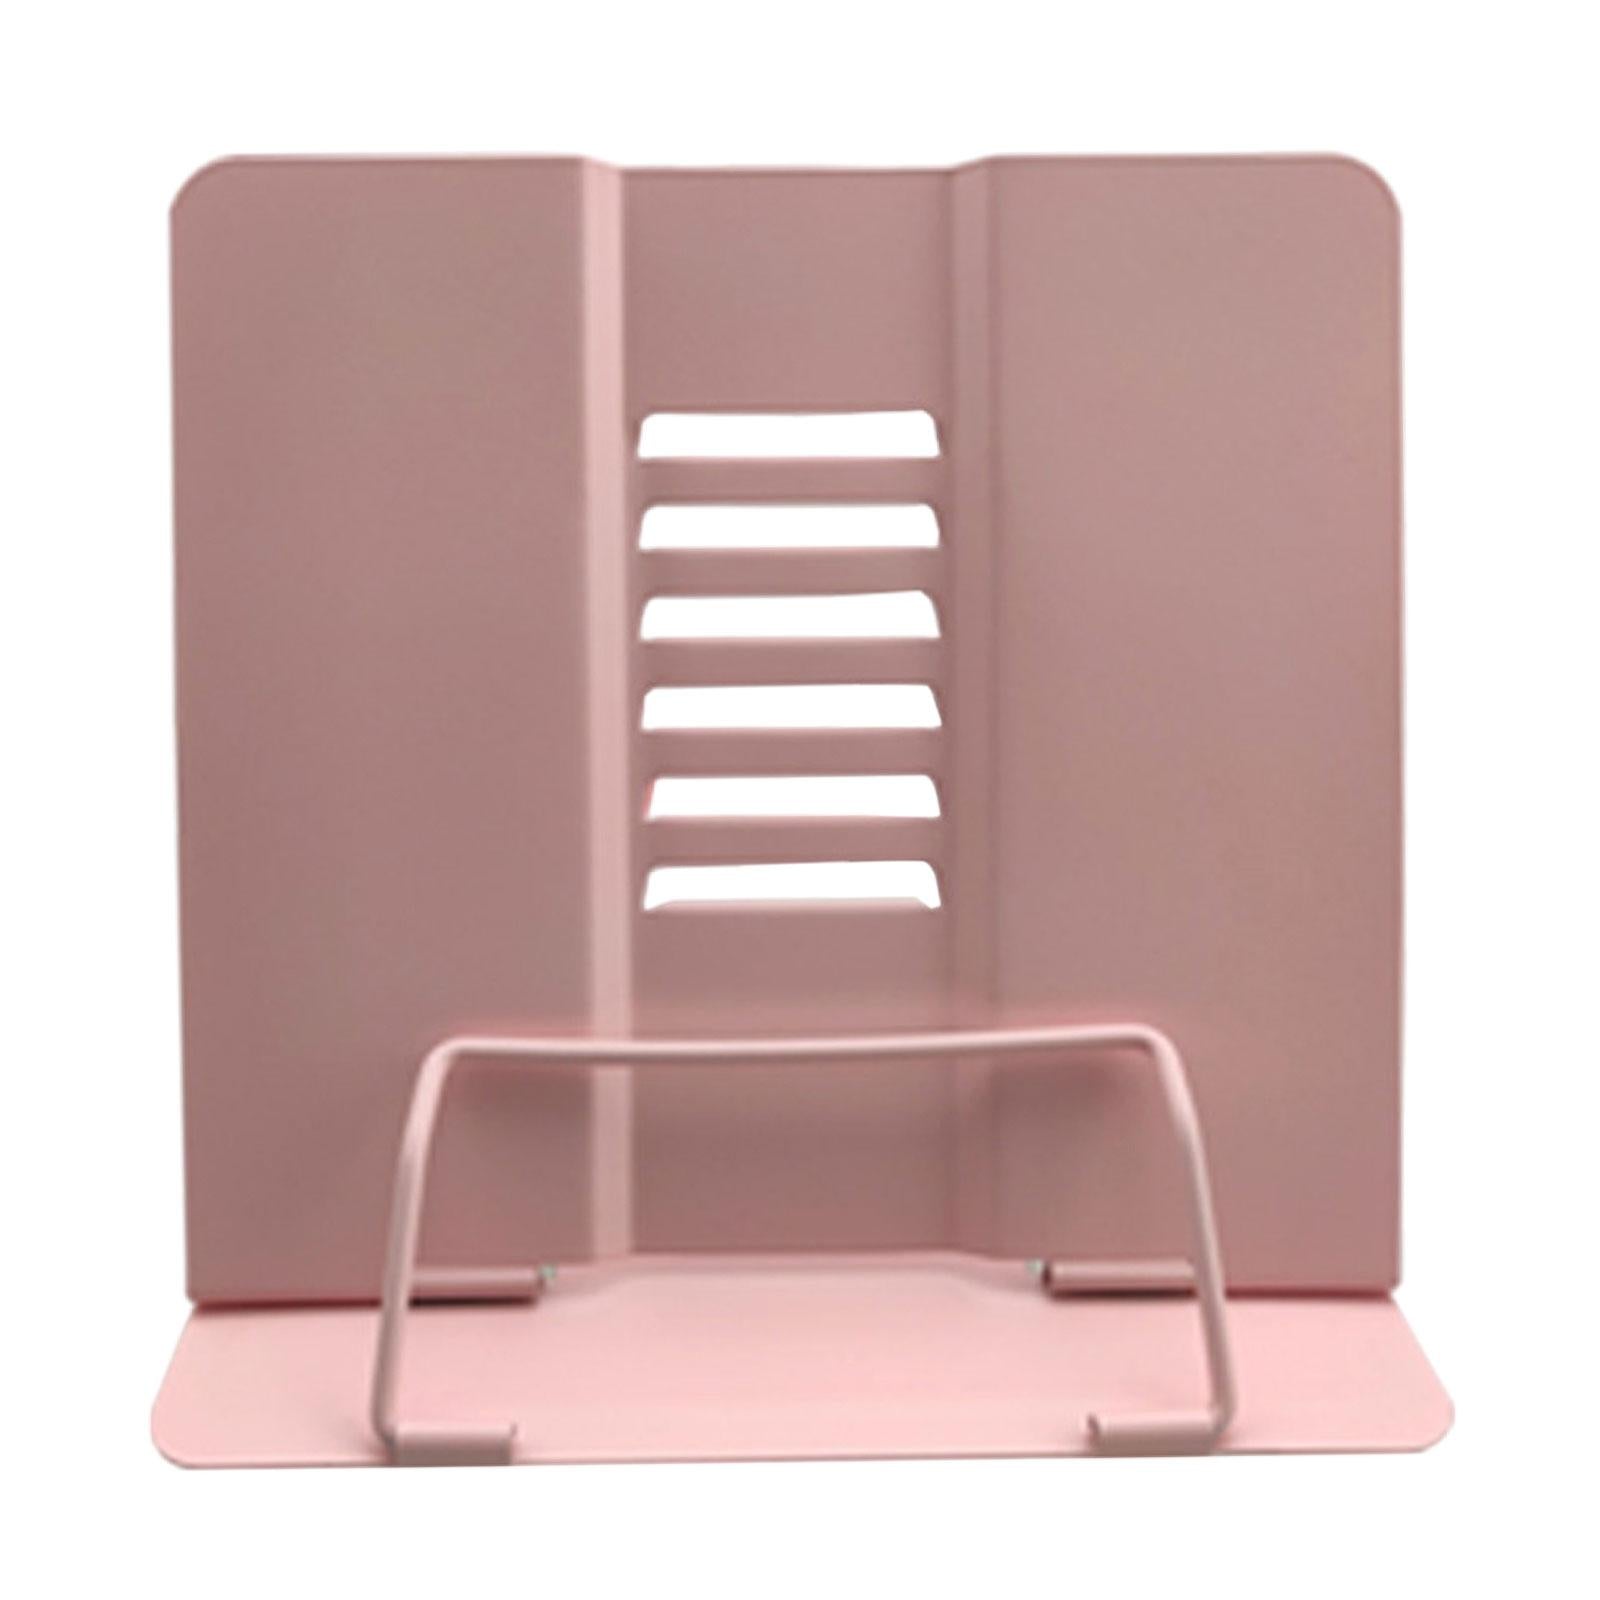 Portable Reading Stand Book Stand Document Holder Rack Adjustable Height Pink